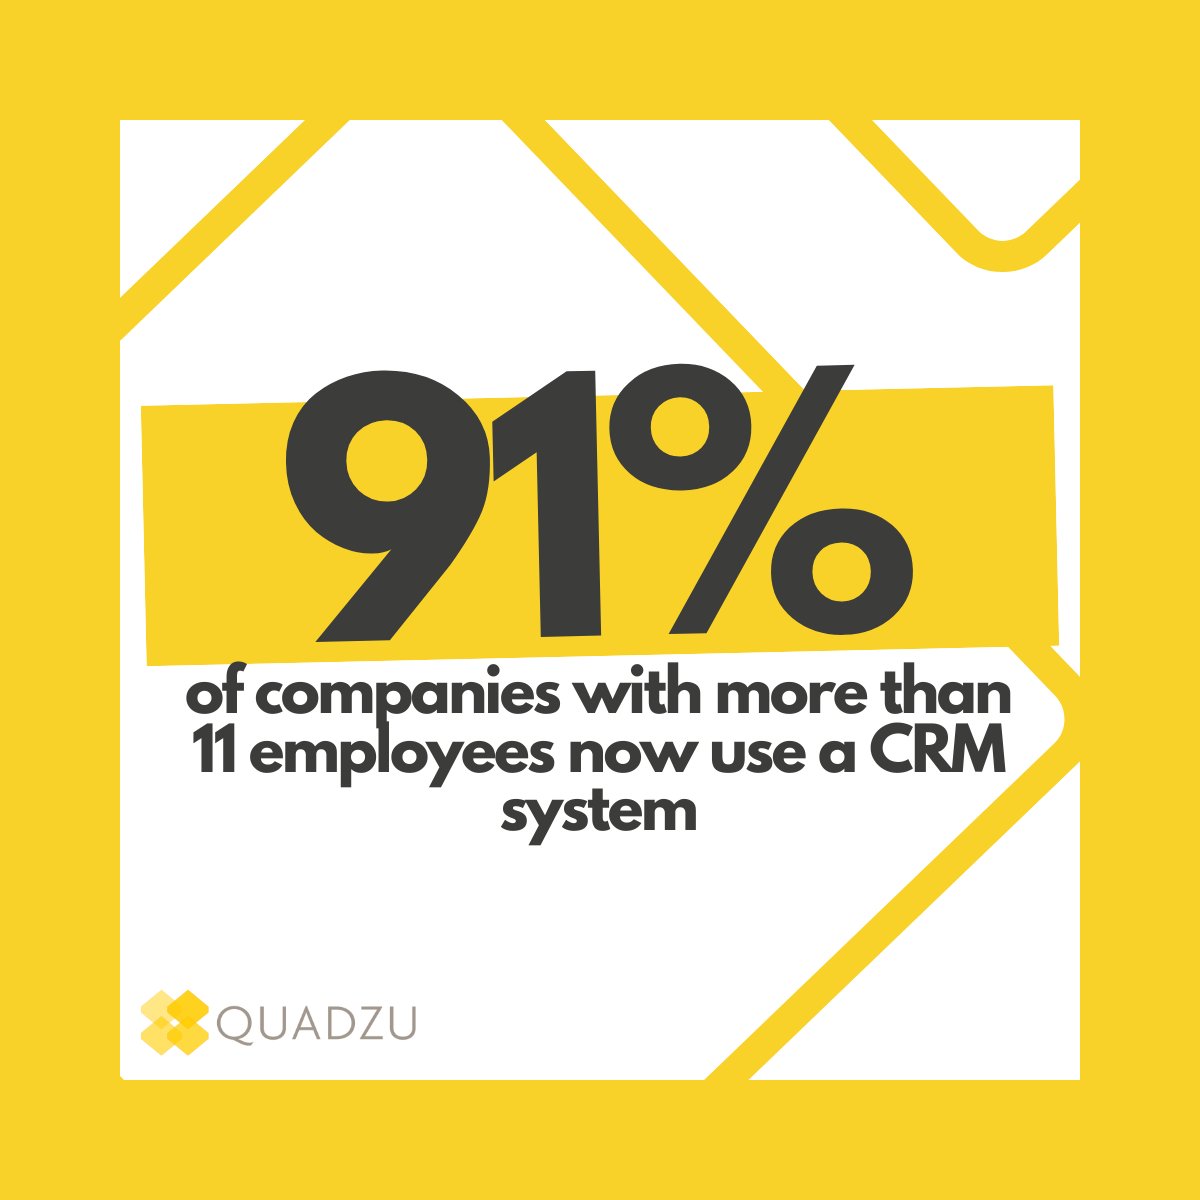 Did you know that 91% of companies with more than 11 employees use a CRM system? 

If you're looking to start using a CRM system and need help on how to get started, contact us today to see how we can help!

#Quadzu #CRM #WorkforceManagement